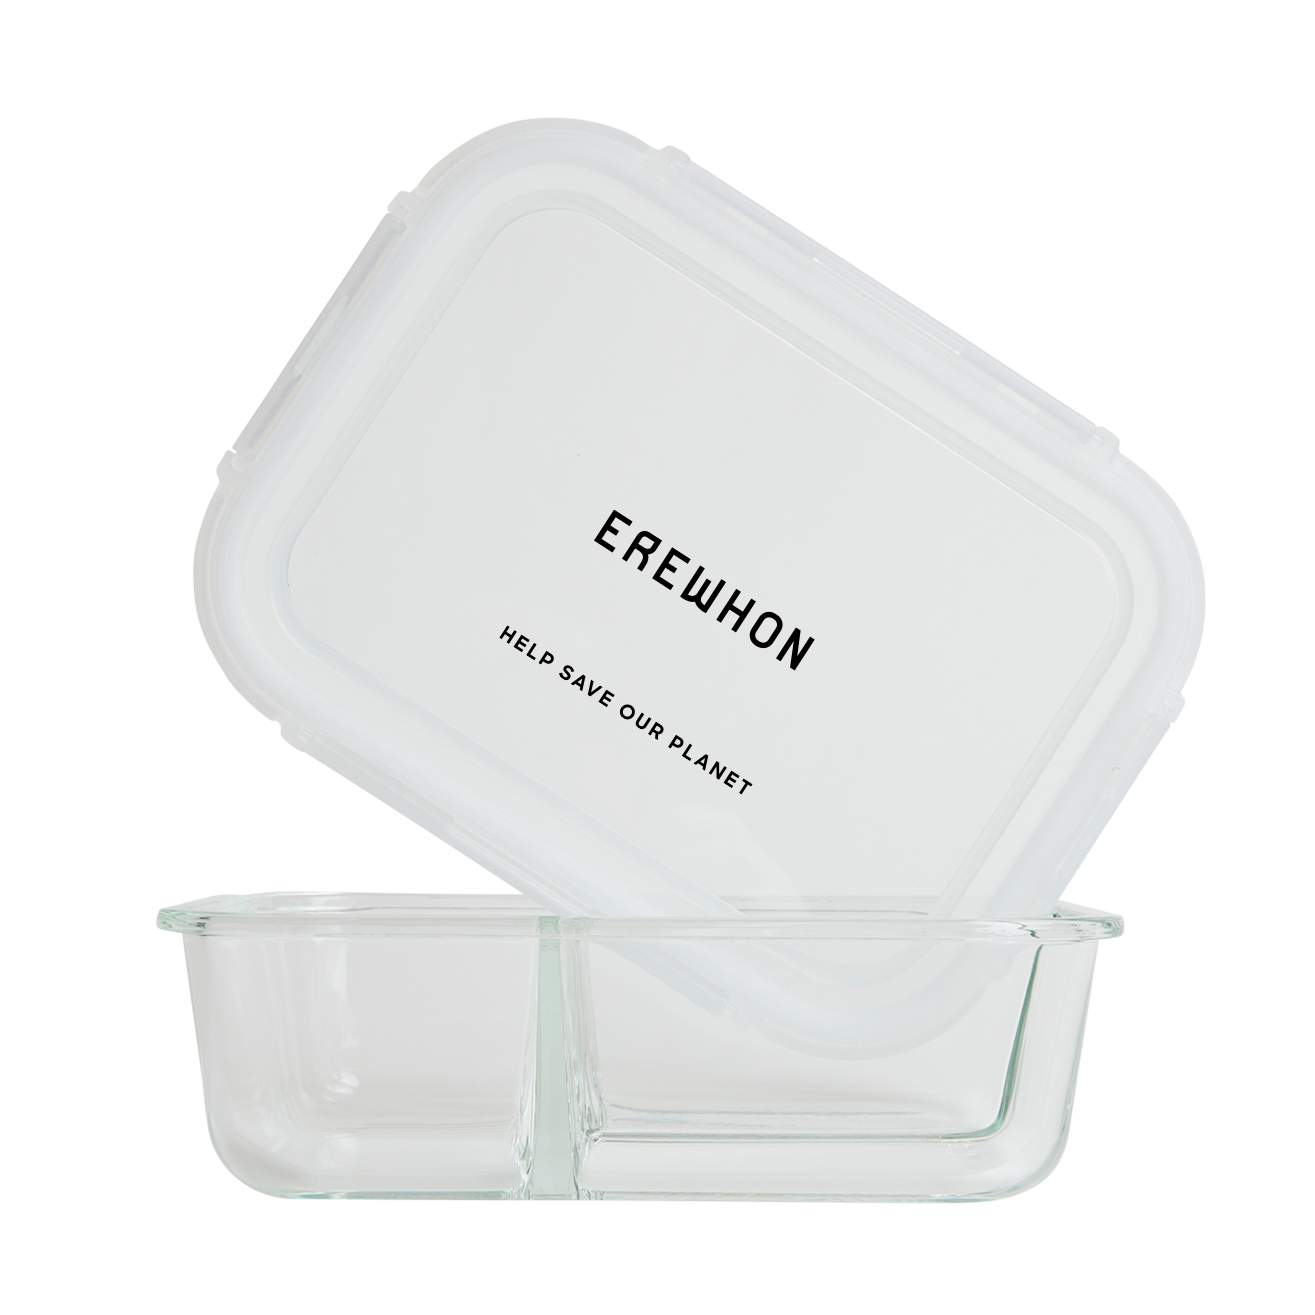 Black Erewhon 3-section glass storage containers with lids, securely packaged in bubble wrap and a cardboard box ready for shipping